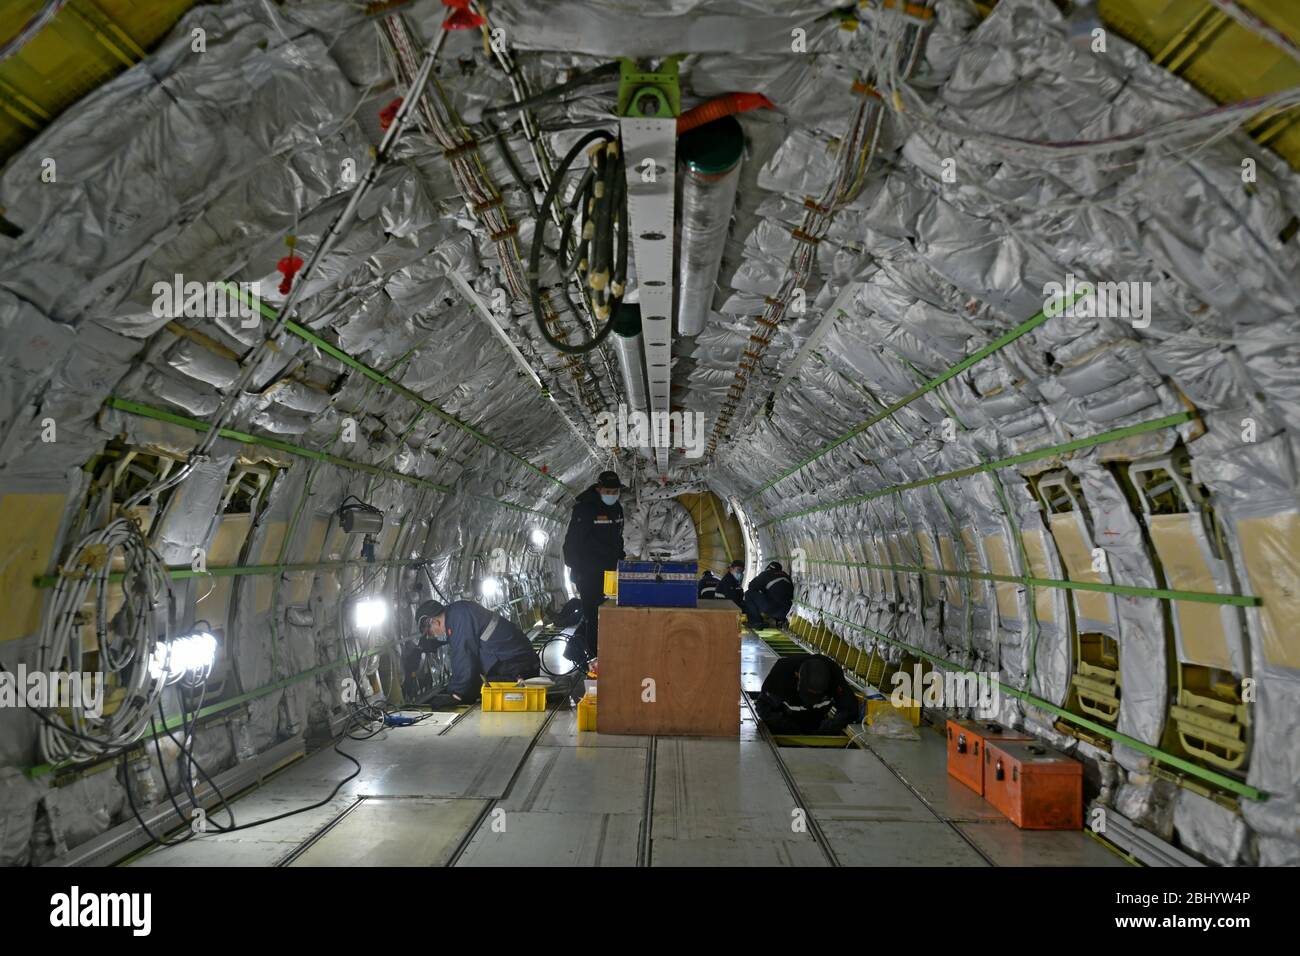 (200428) -- JINAN, April 28, 2020 (Xinhua) -- Technicians refit an airliner at Taikoo (Shandong) Aircraft Engineering Company Limited (STAECO) in Jinan, east China's Shandong Province, April 27, 2020.  The COVID-19 pandemic has led to a significant decrease in airline travel and passenger revenue. Since its production recovered on Feb. 10, STAECO has been offering Passenger-to-Freighter (PTF) solutions for airline operators which need more cargo planes to address this market change. So far, the company has accomplished three PTF conversions for its clients. (Xinhua/Zhu Zheng) Stock Photo